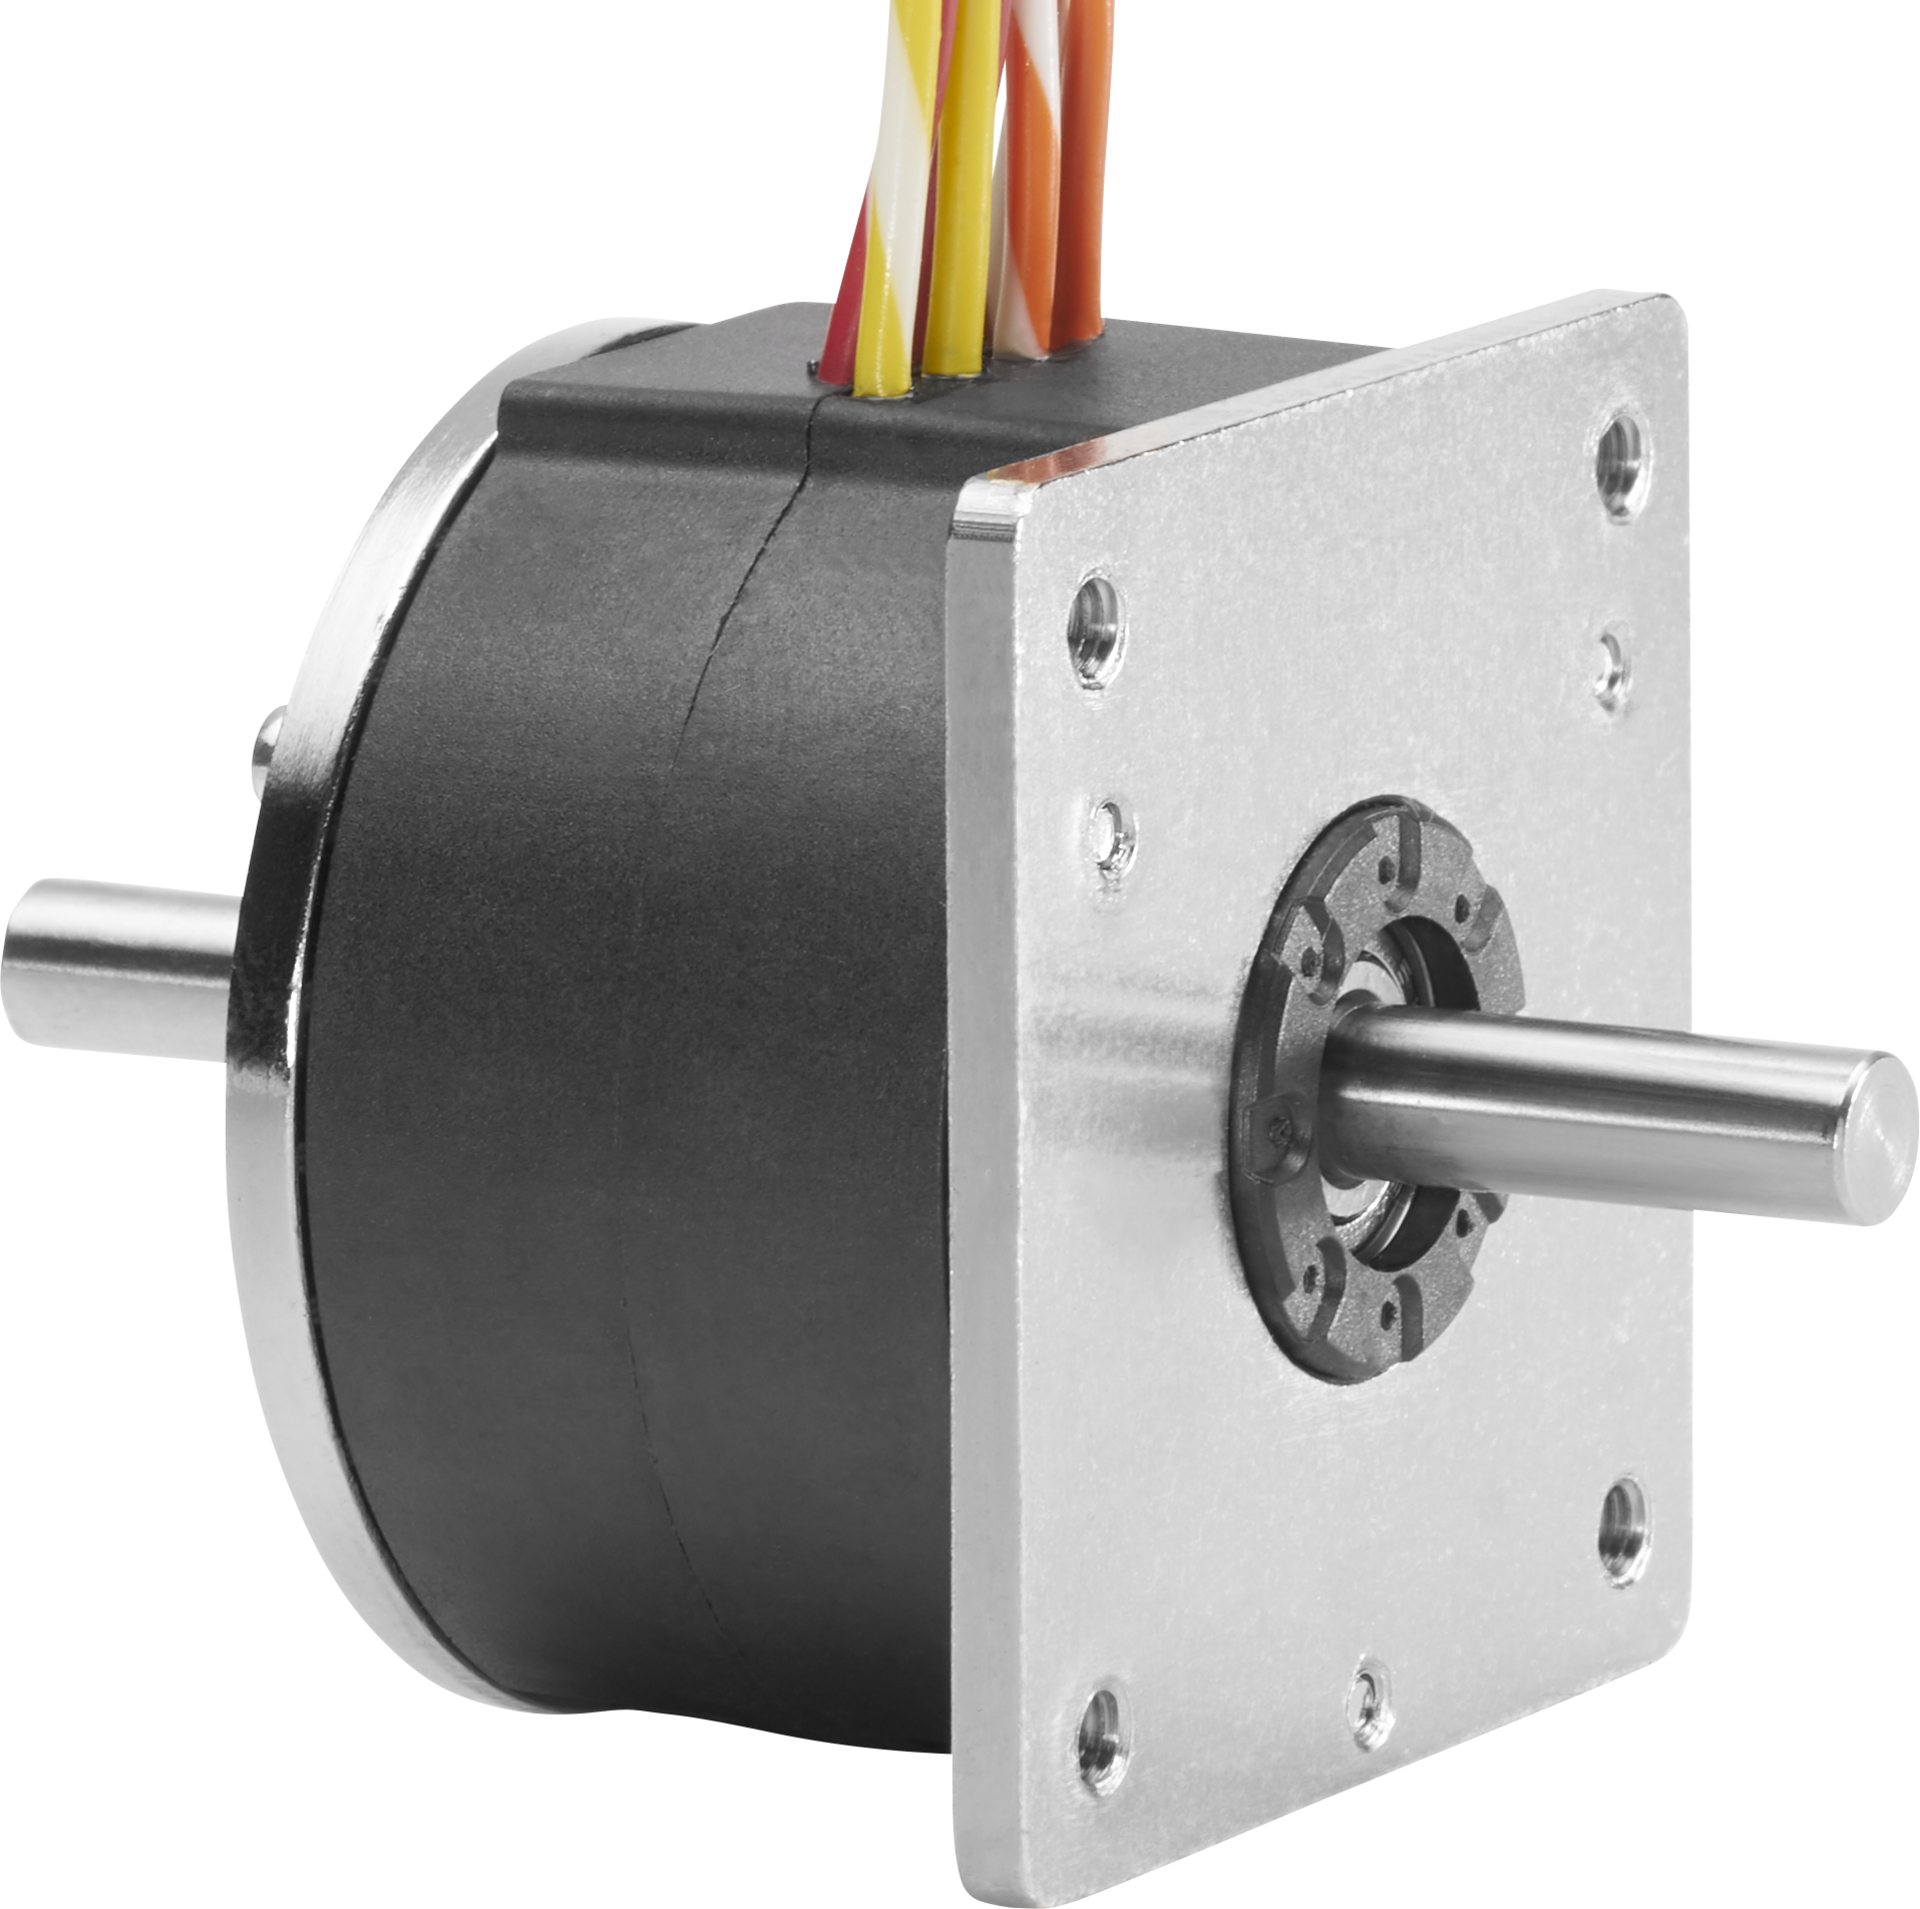 Stepper Motor2 The Difference Between DC Motor and Stepper Motor